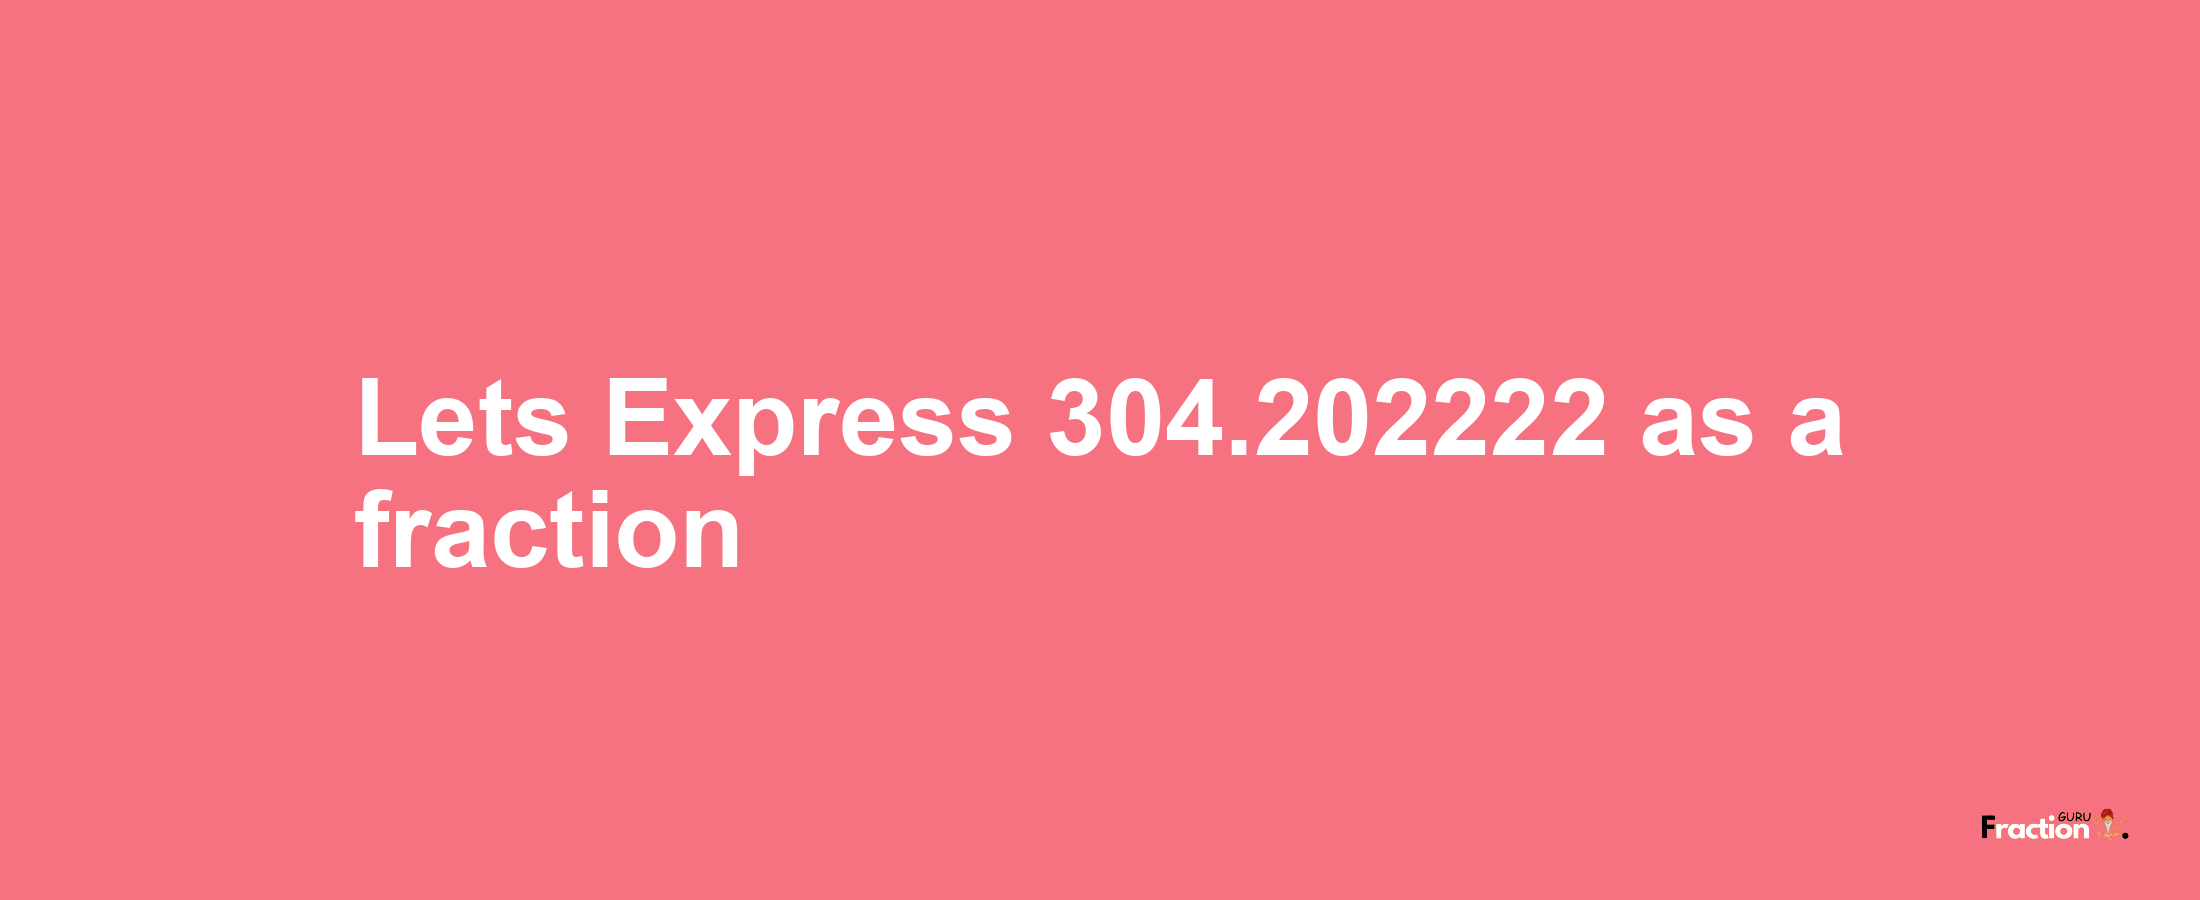 Lets Express 304.202222 as afraction